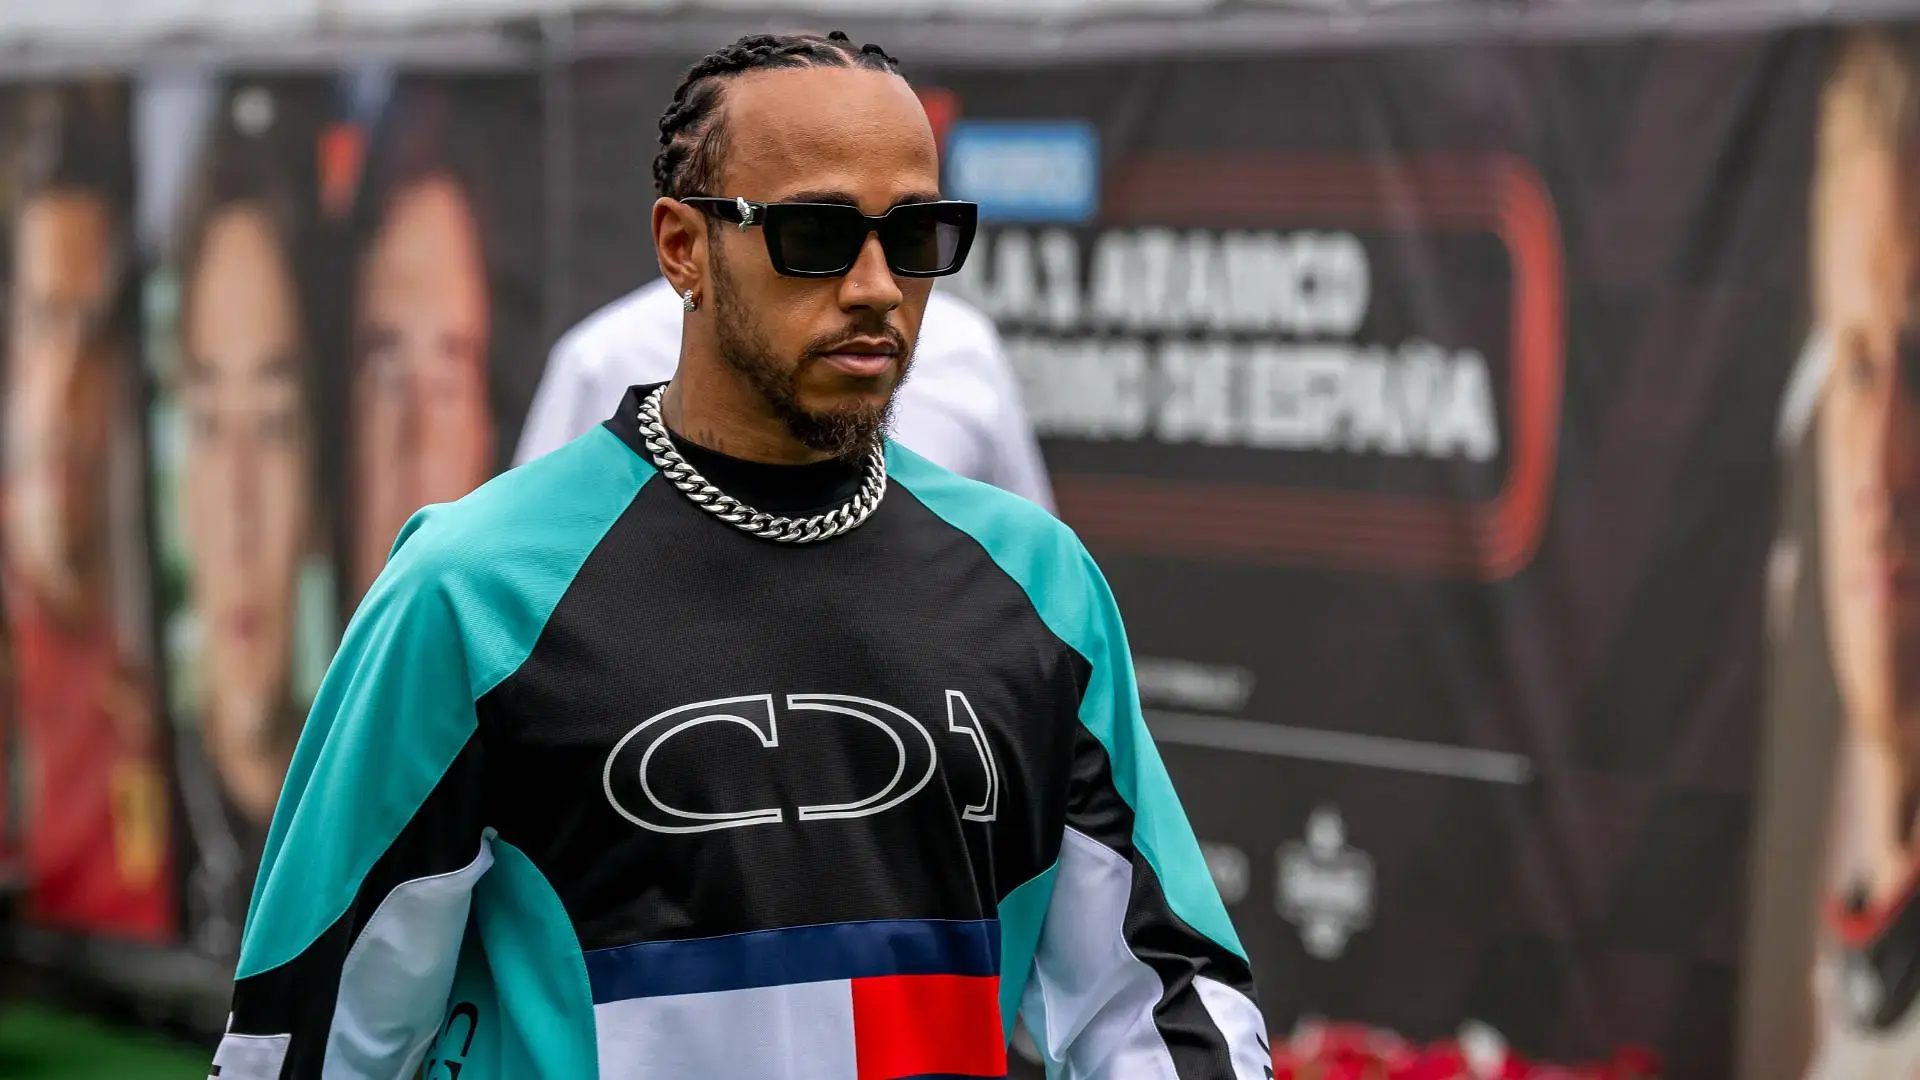 Hamilton not worried about anonymous email about Mercedes